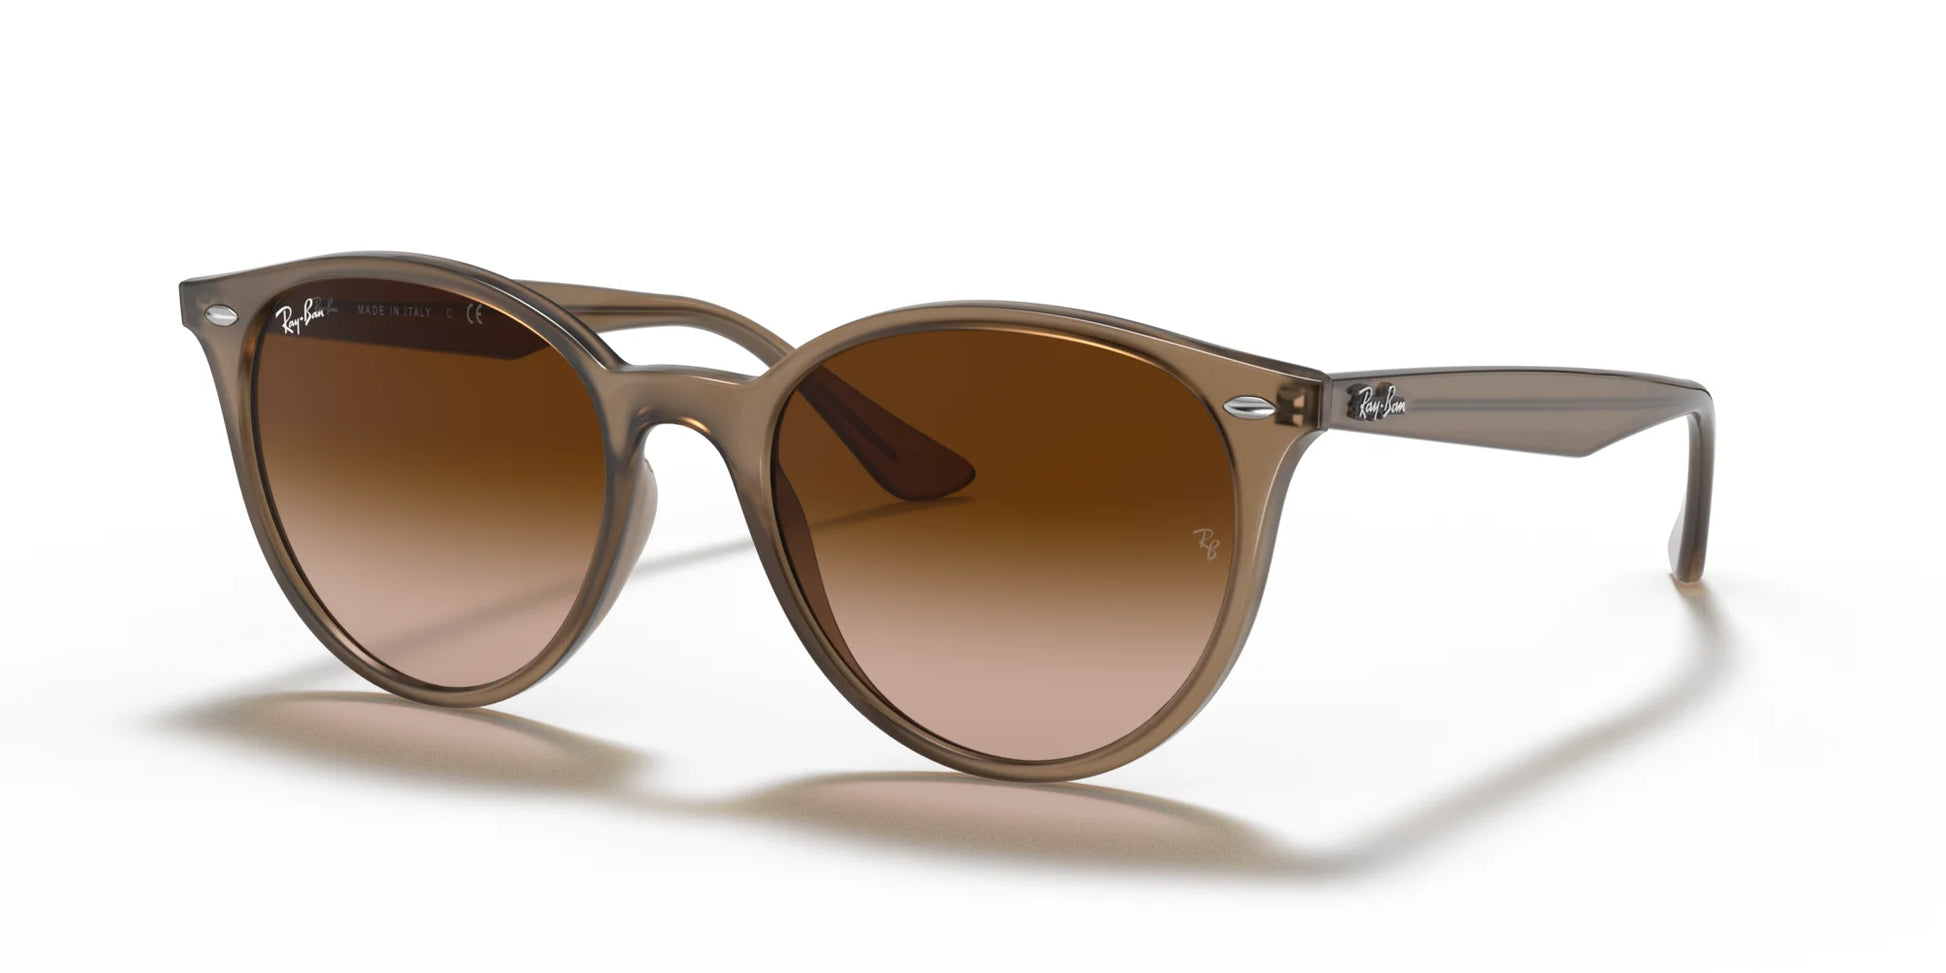 Ray-Ban RB4305 Sunglasses Beige / Brown Gradient